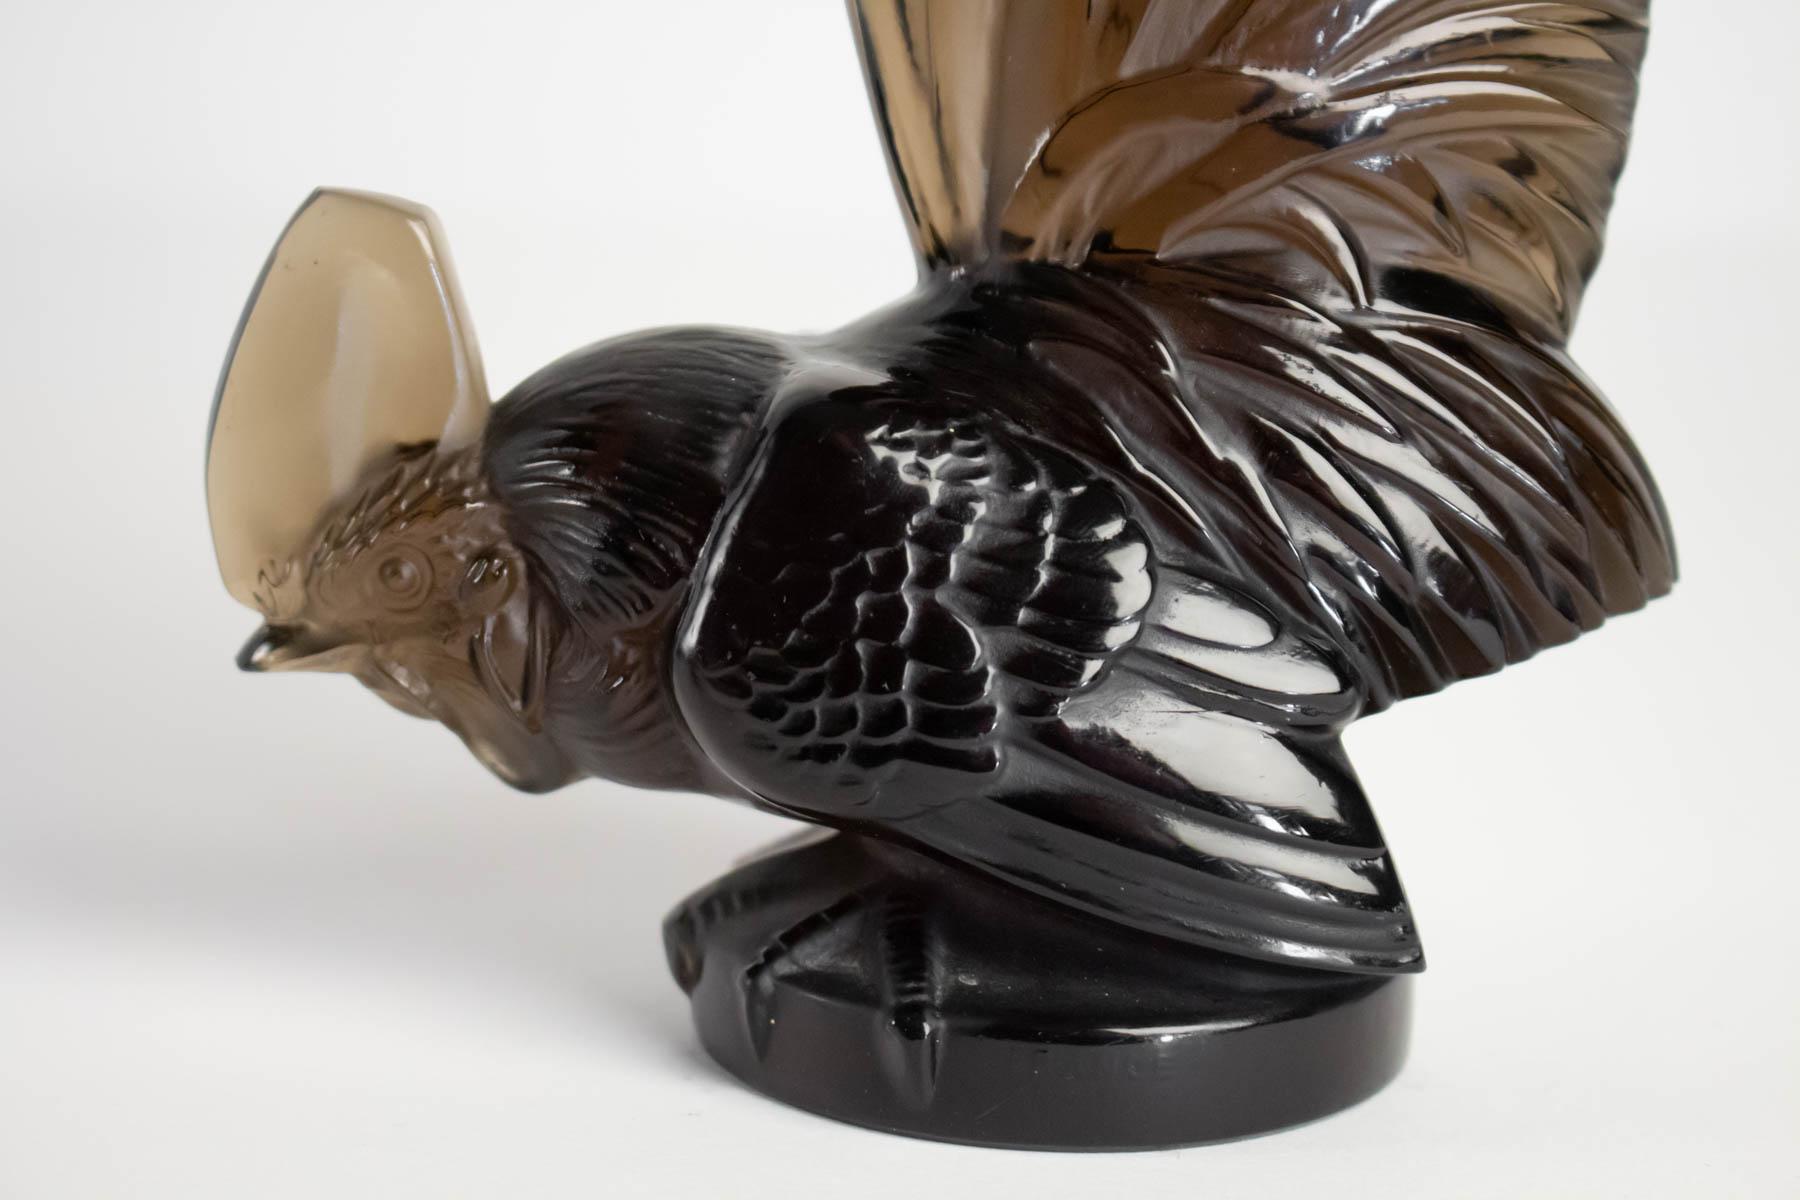 Rene Lalique Mascotte Coq Nain: 19.5 cm tall dark gray also Topaze rooster figure with high tail feathers on incorporated round base R. Lalique Mascotte.
Bibliography Model created in 1928 H.: 21 cm
Catalogue raisonné F. Marcilhac, ref: 1135: